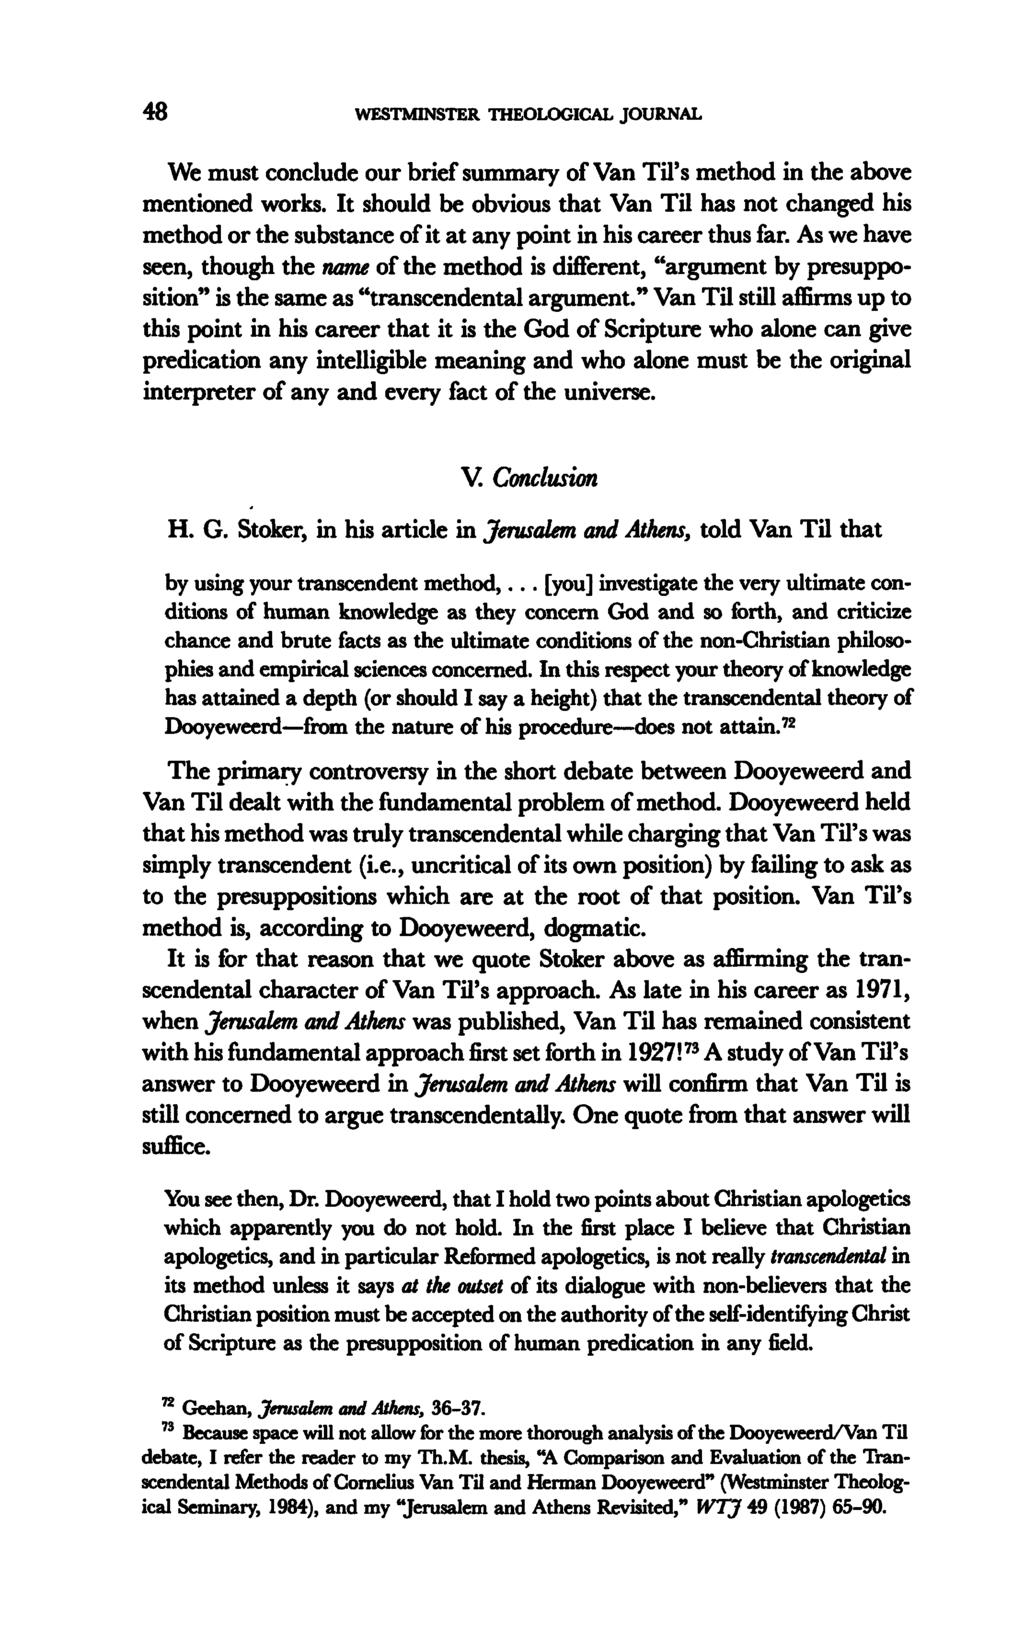 48 WESTMINSTER THEOLOGICAL JOURNAL We must conclude our brief summary of Van Til's method in the above mentioned works.